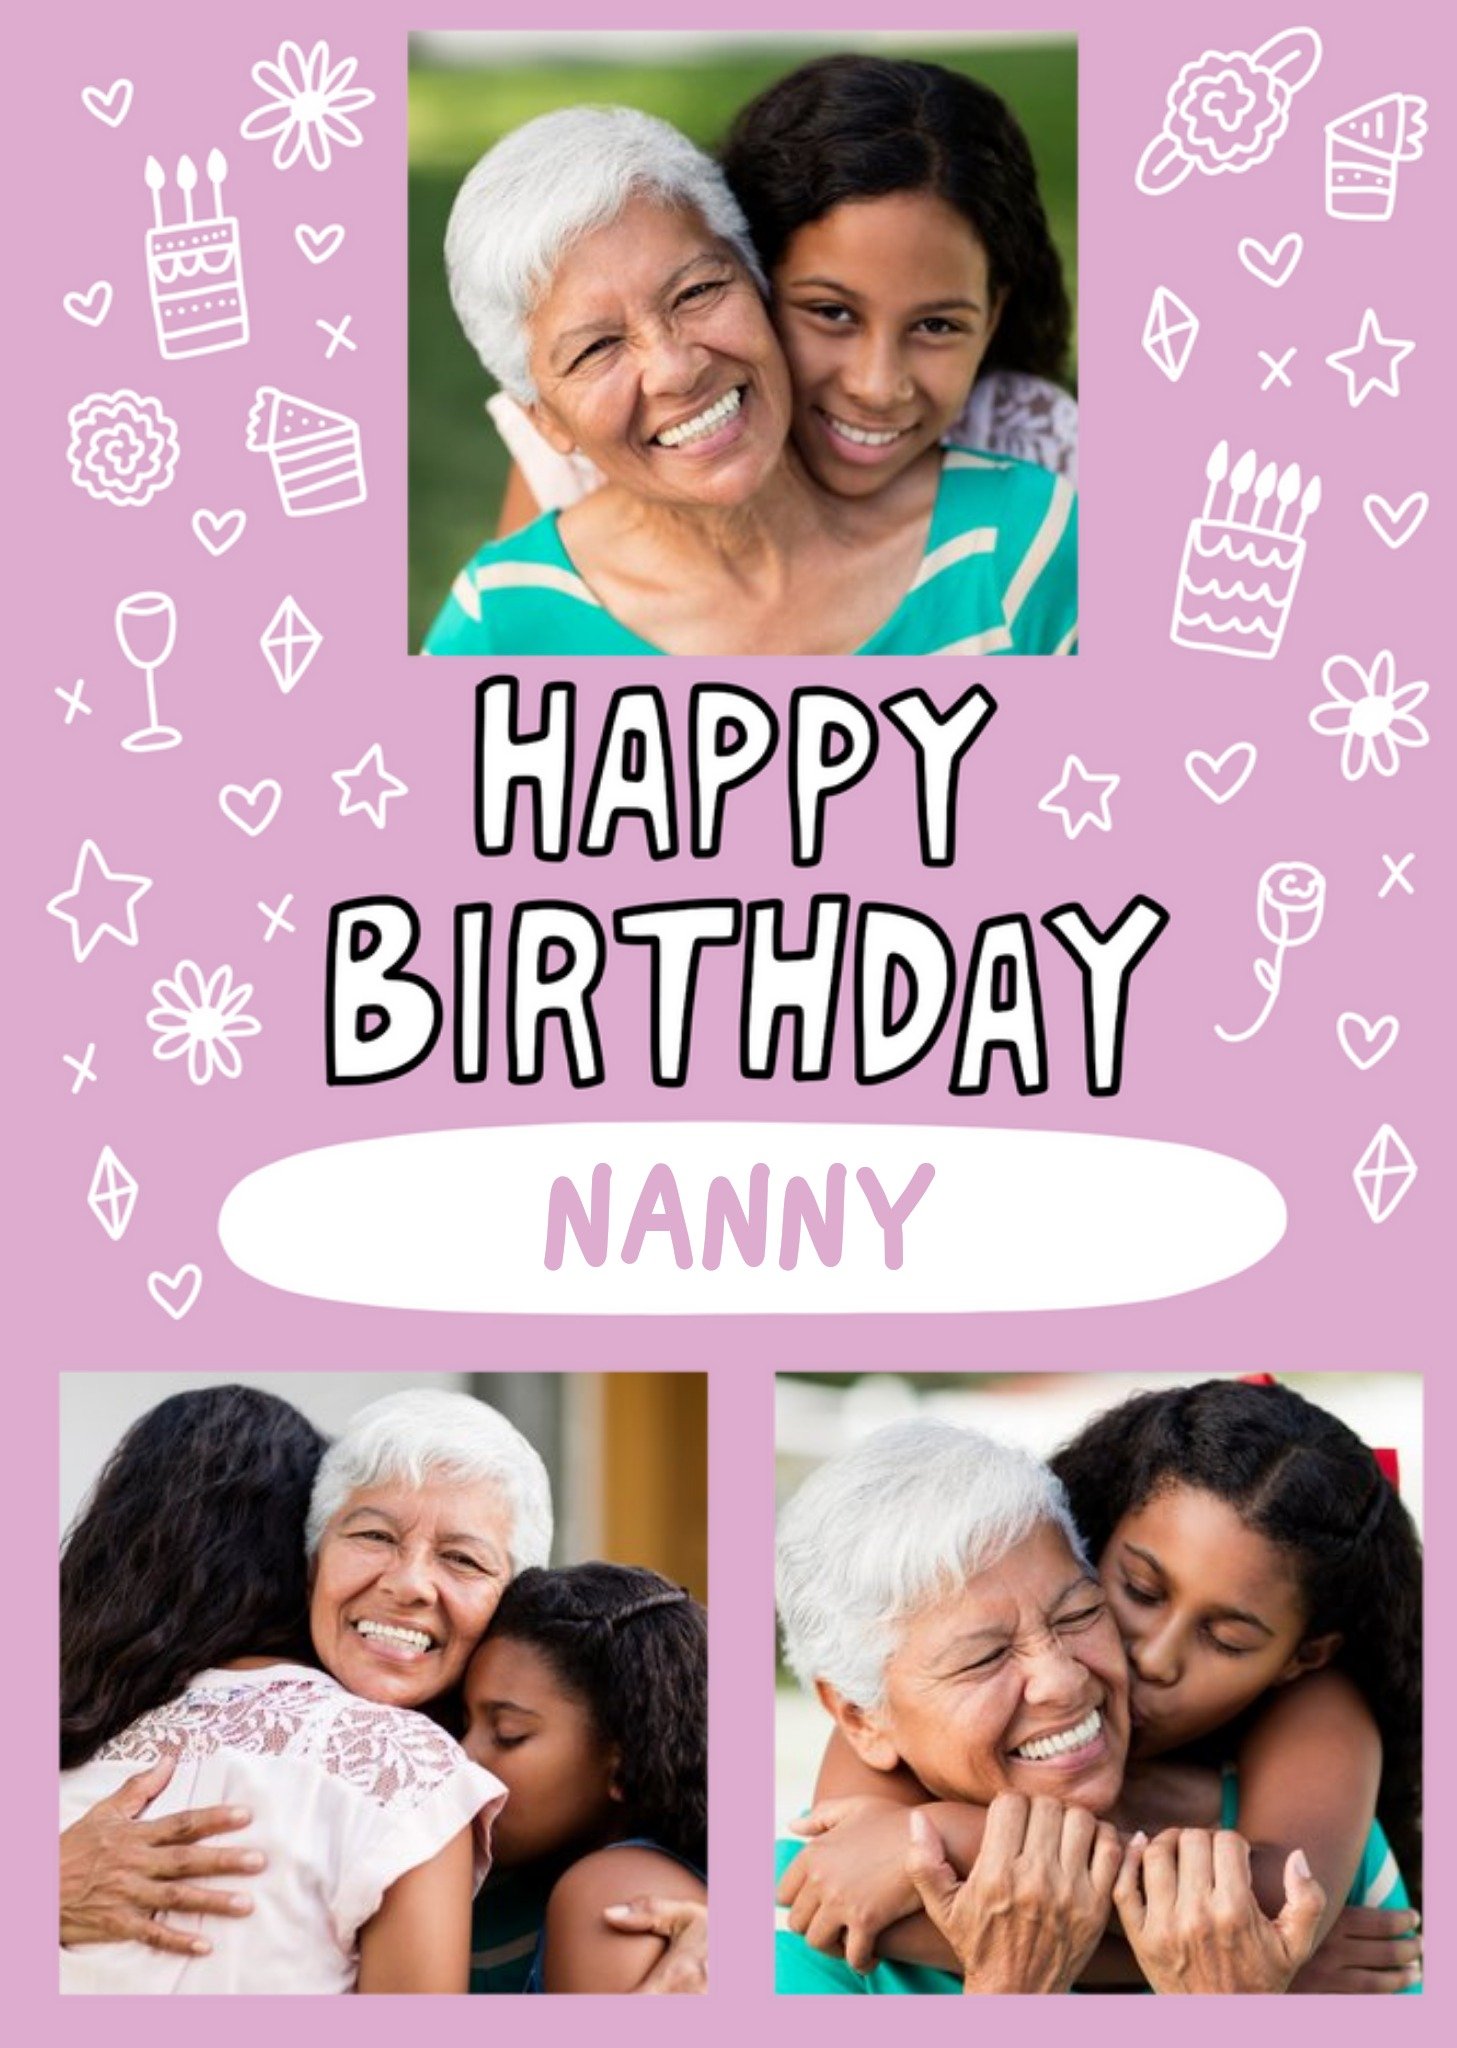 Moonpig Pink Background And Decorative Icons With Three Photos Upload Birthday Card Ecard